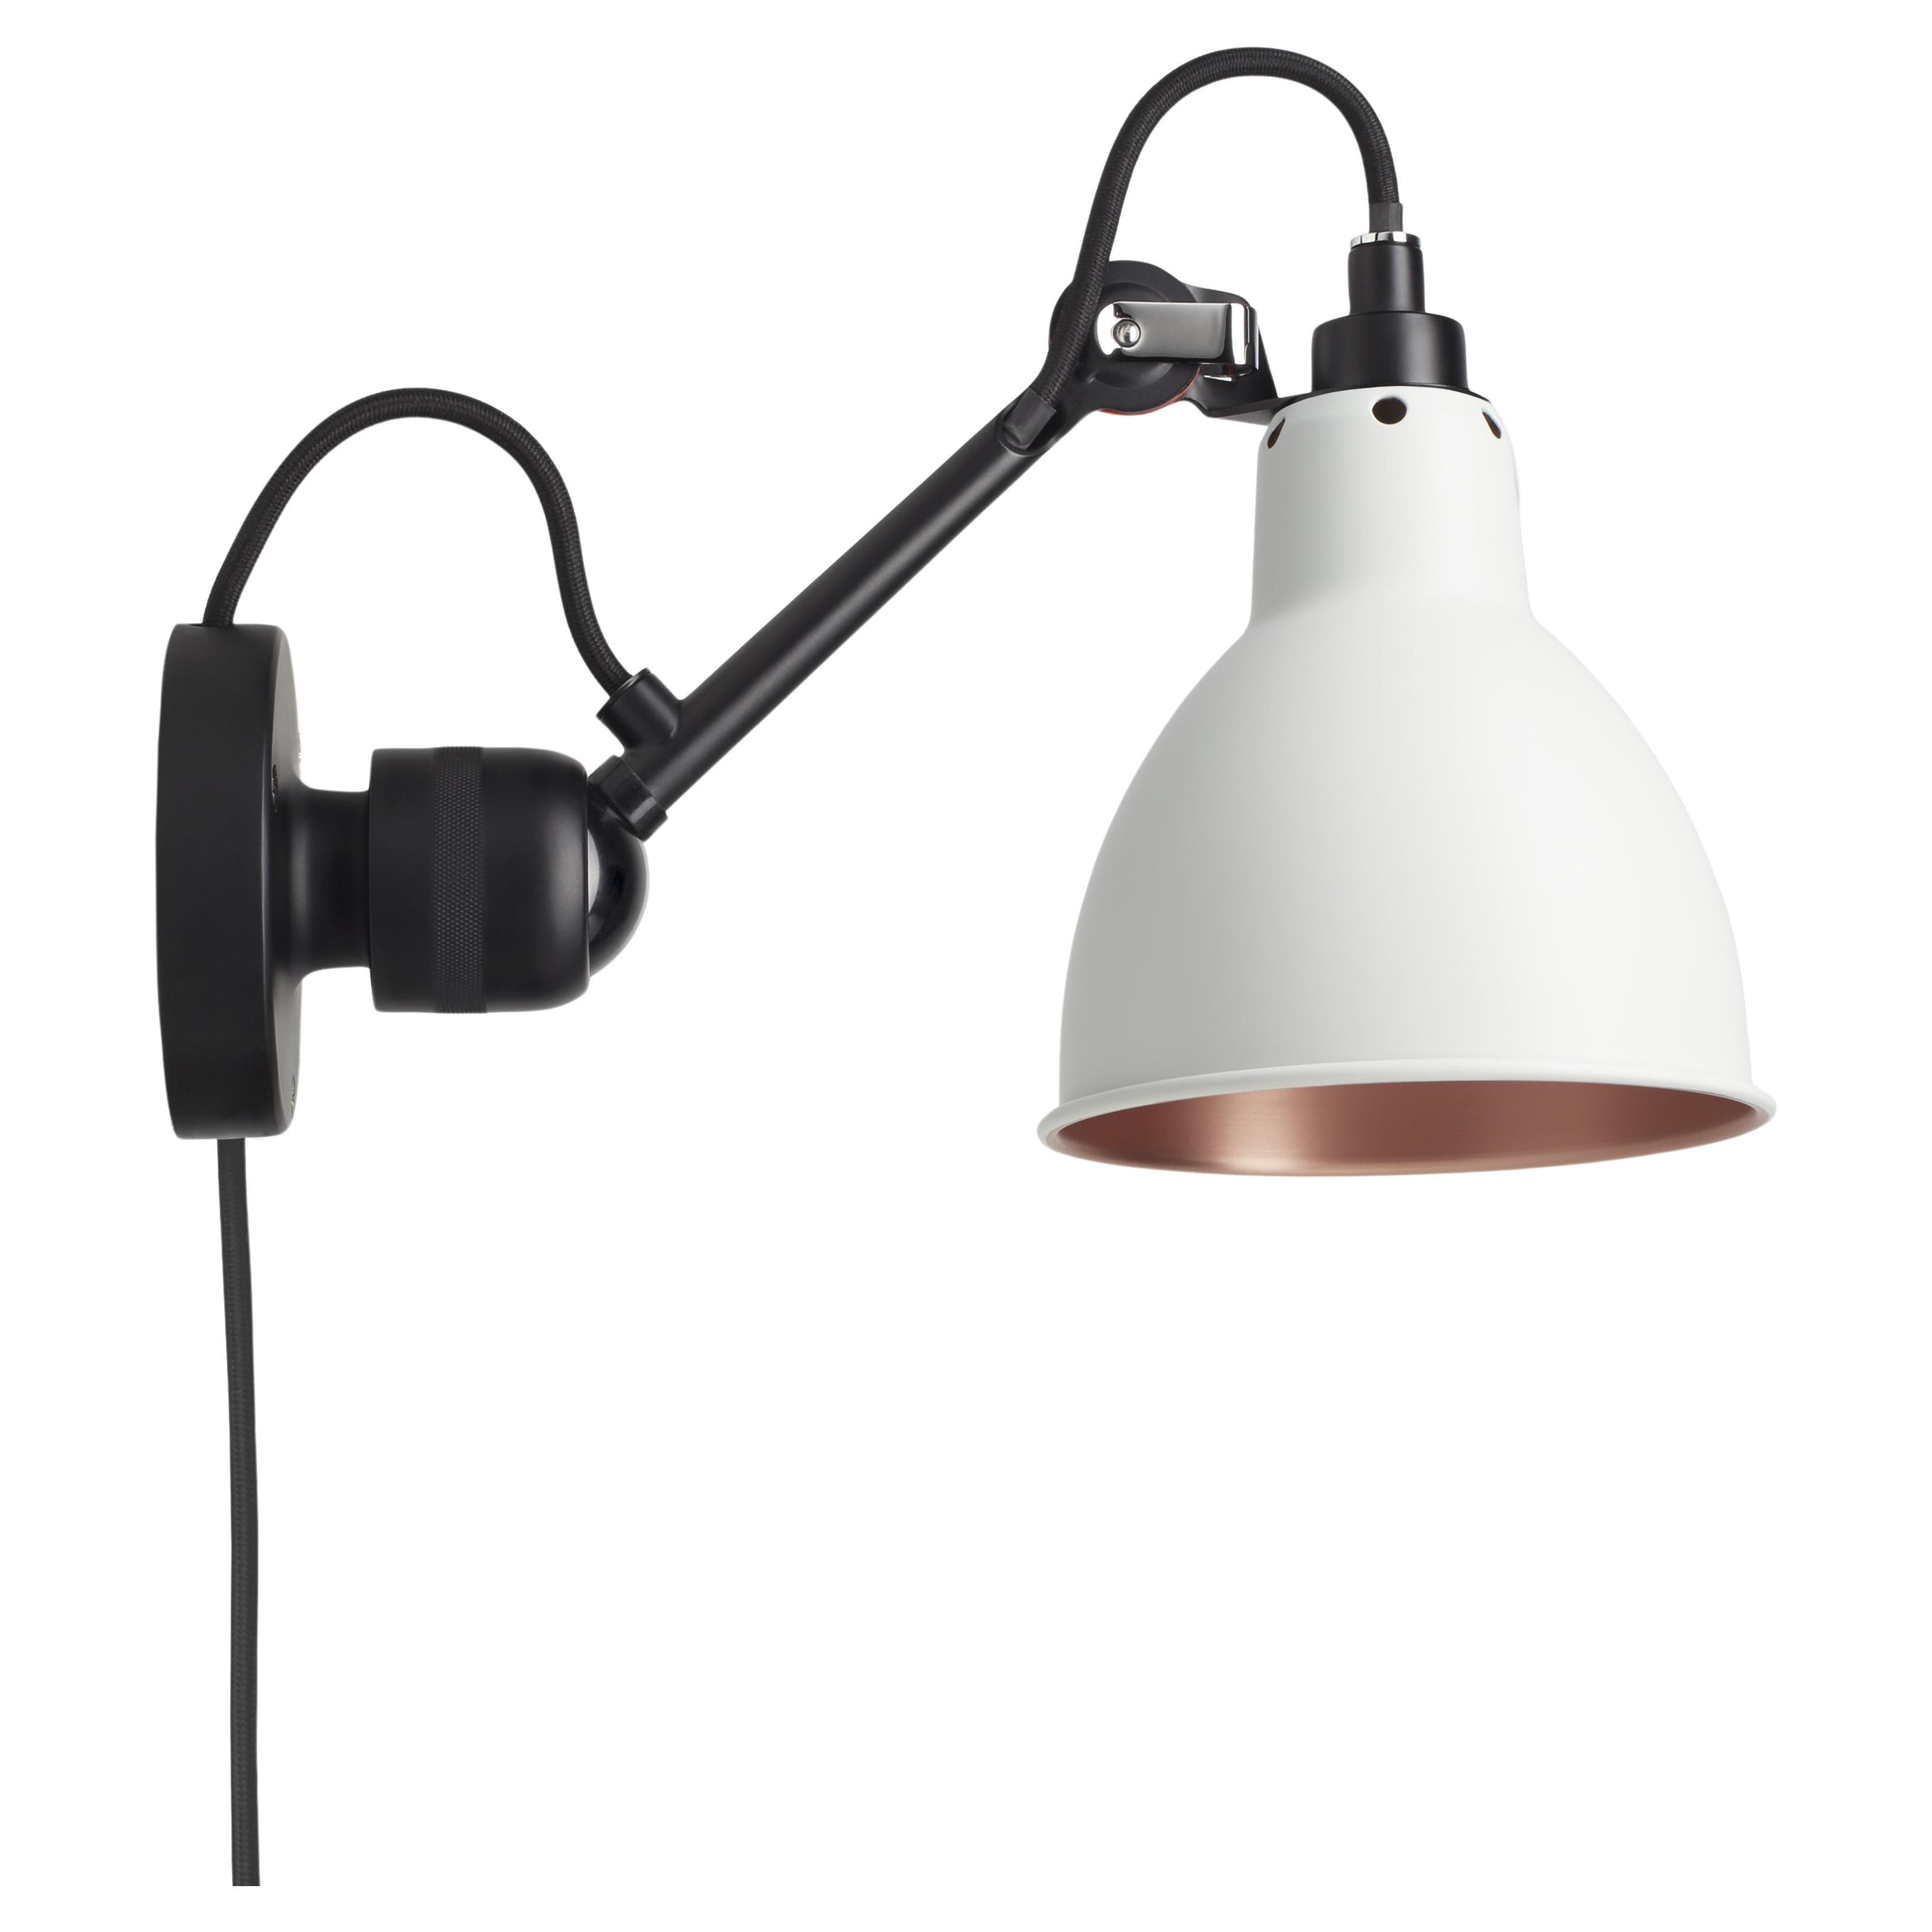 DCW Editions La Lampe Gras N°304 CA Wall Lamp in Black Arm & White Copper Shade For Sale